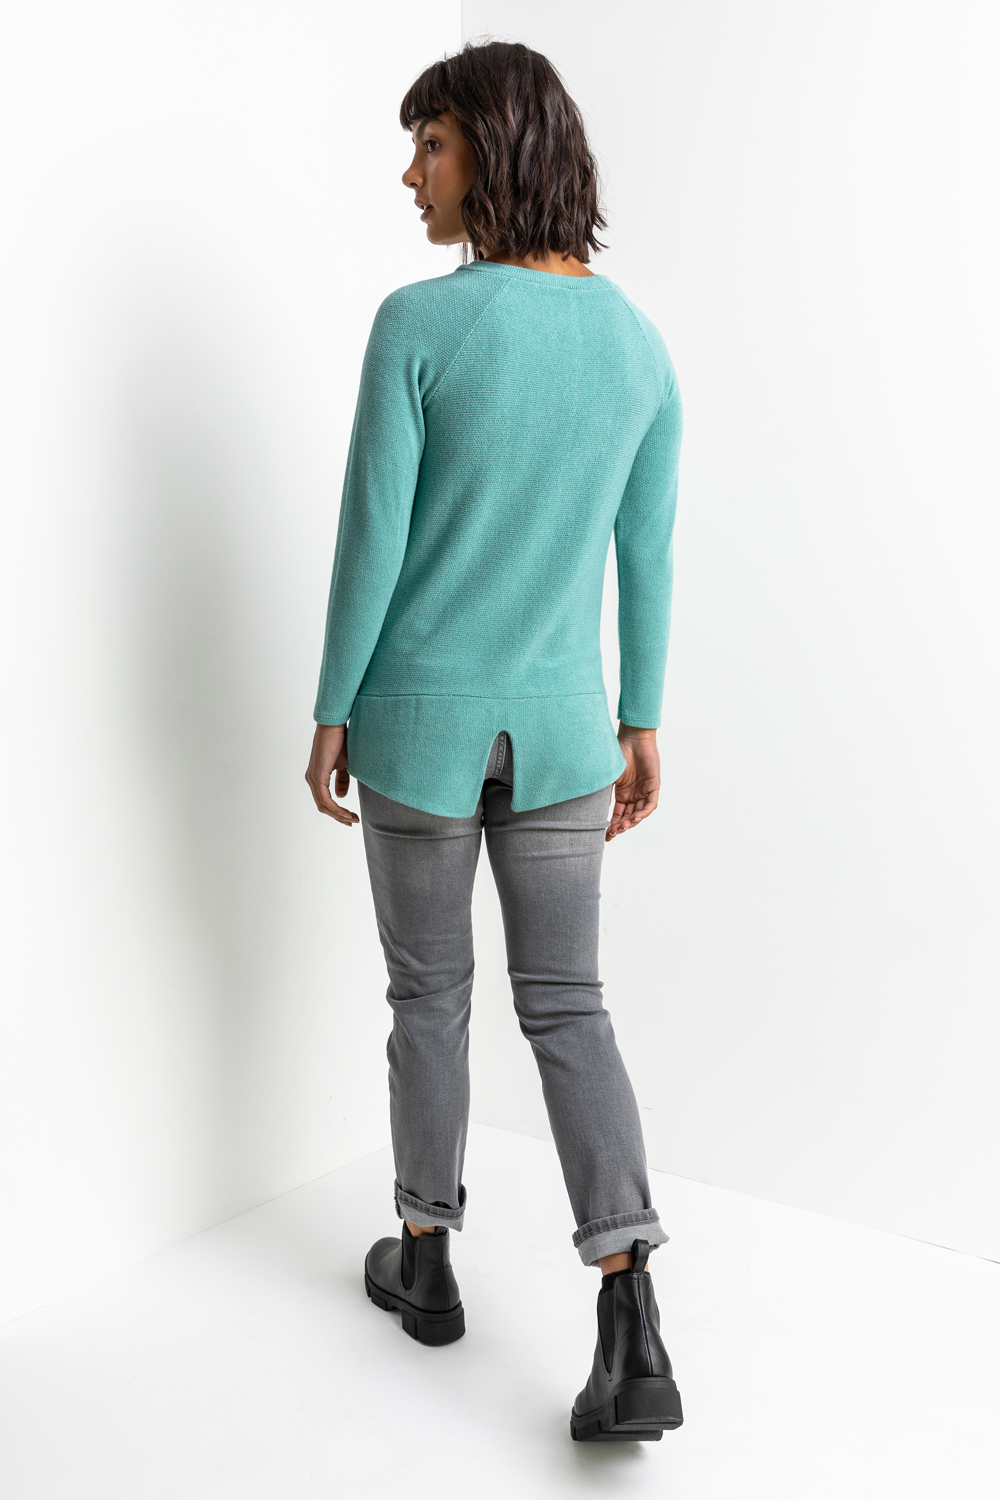 Mint Soft Jersey Sweatshirt with Necklace, Image 2 of 5